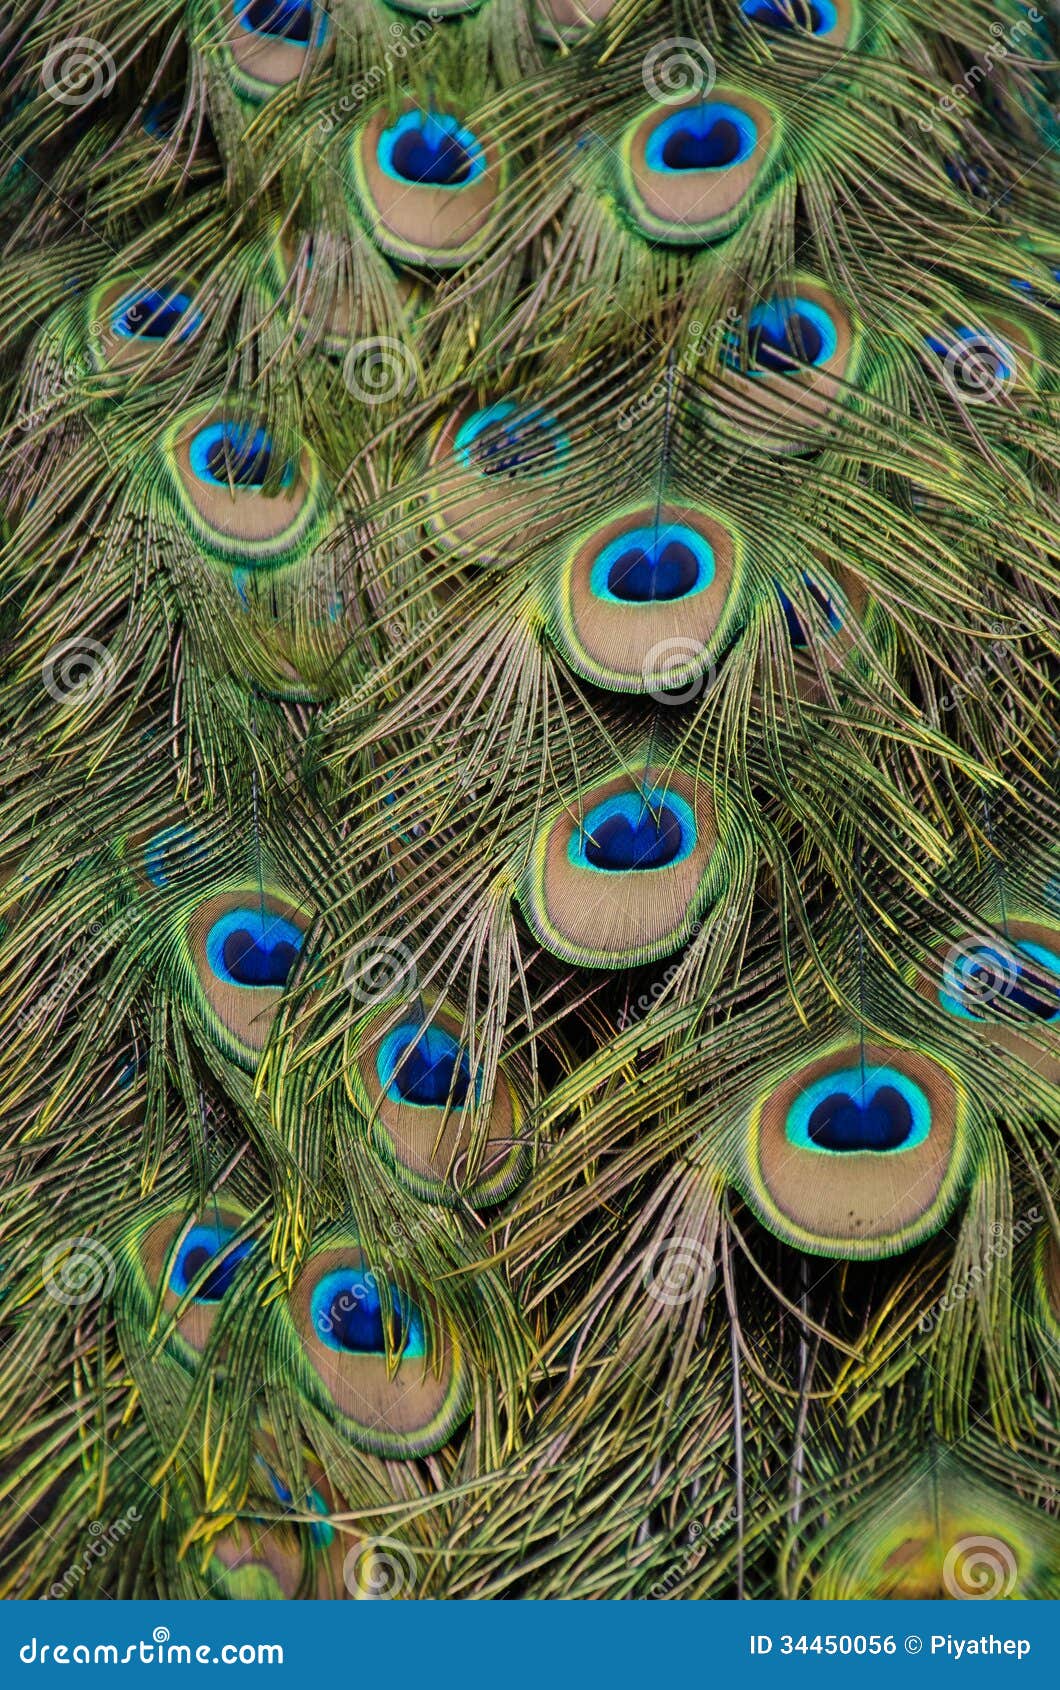 Peacock stock photo. Image of peacock, feather, animal - 34450056